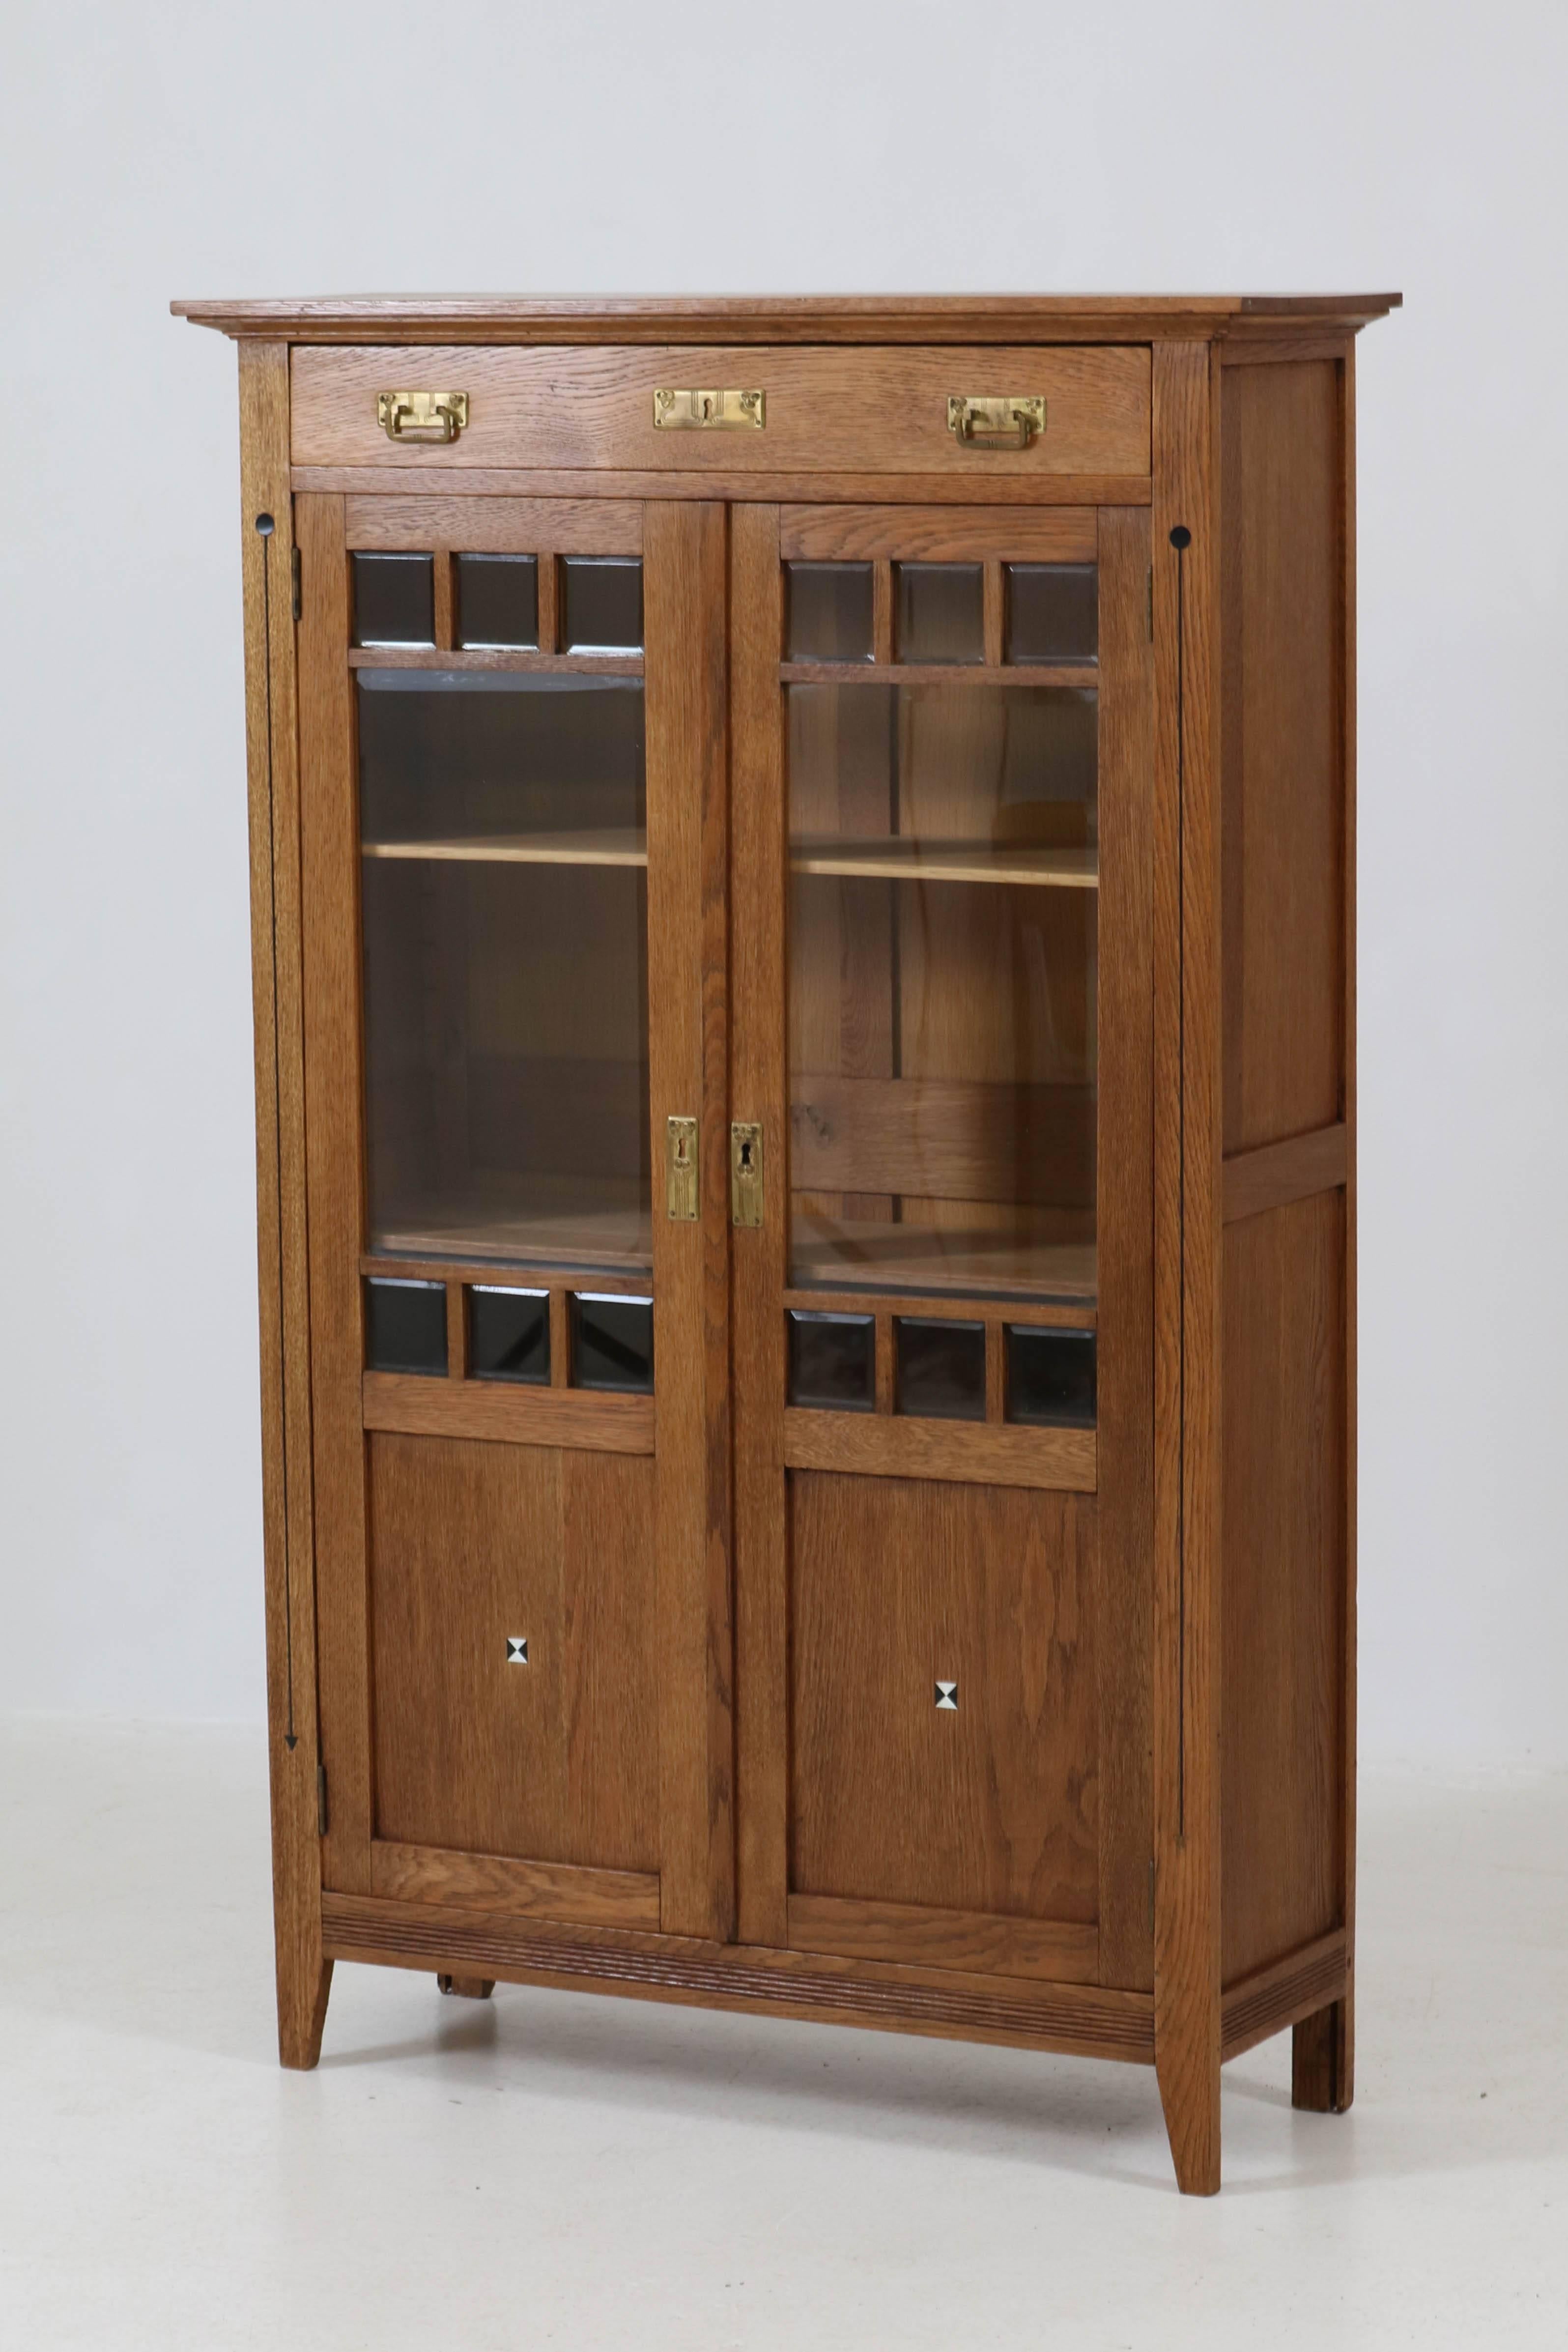 Stylish Art Nouveau Arts & Crafts bookcase with inlay, 1900s.
Solid oak with 14 original beveled pieces of glass.
Three original adjustable oak shelves.
Original brass hardware on doors and drawer.
In very good condition with minor wear